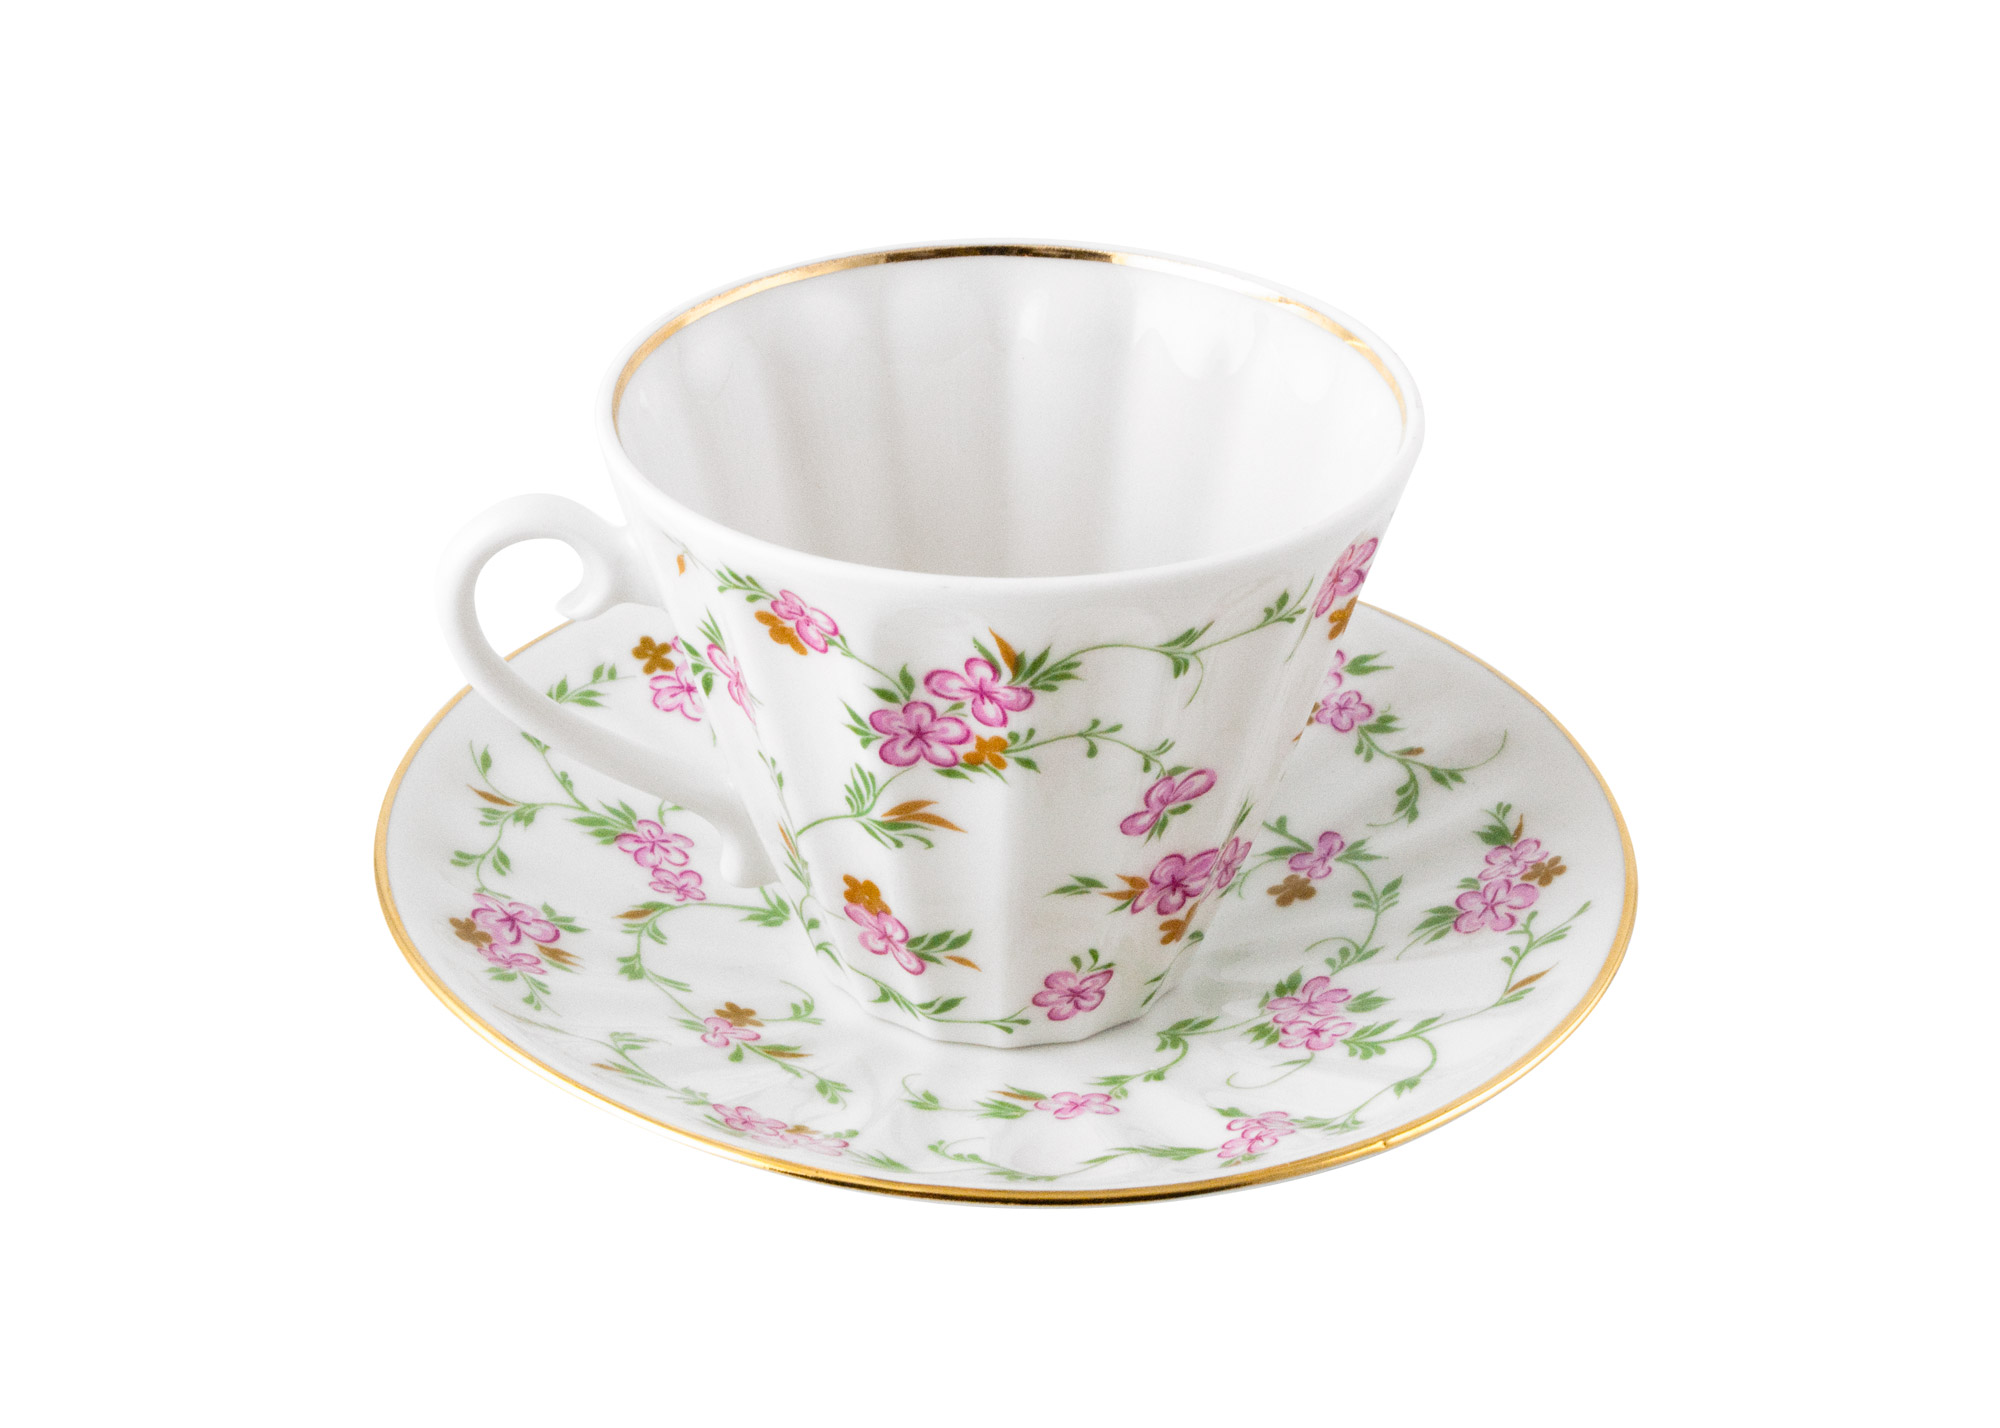 Buy Victorian Pattern Cup and Saucer at GoldenCockerel.com